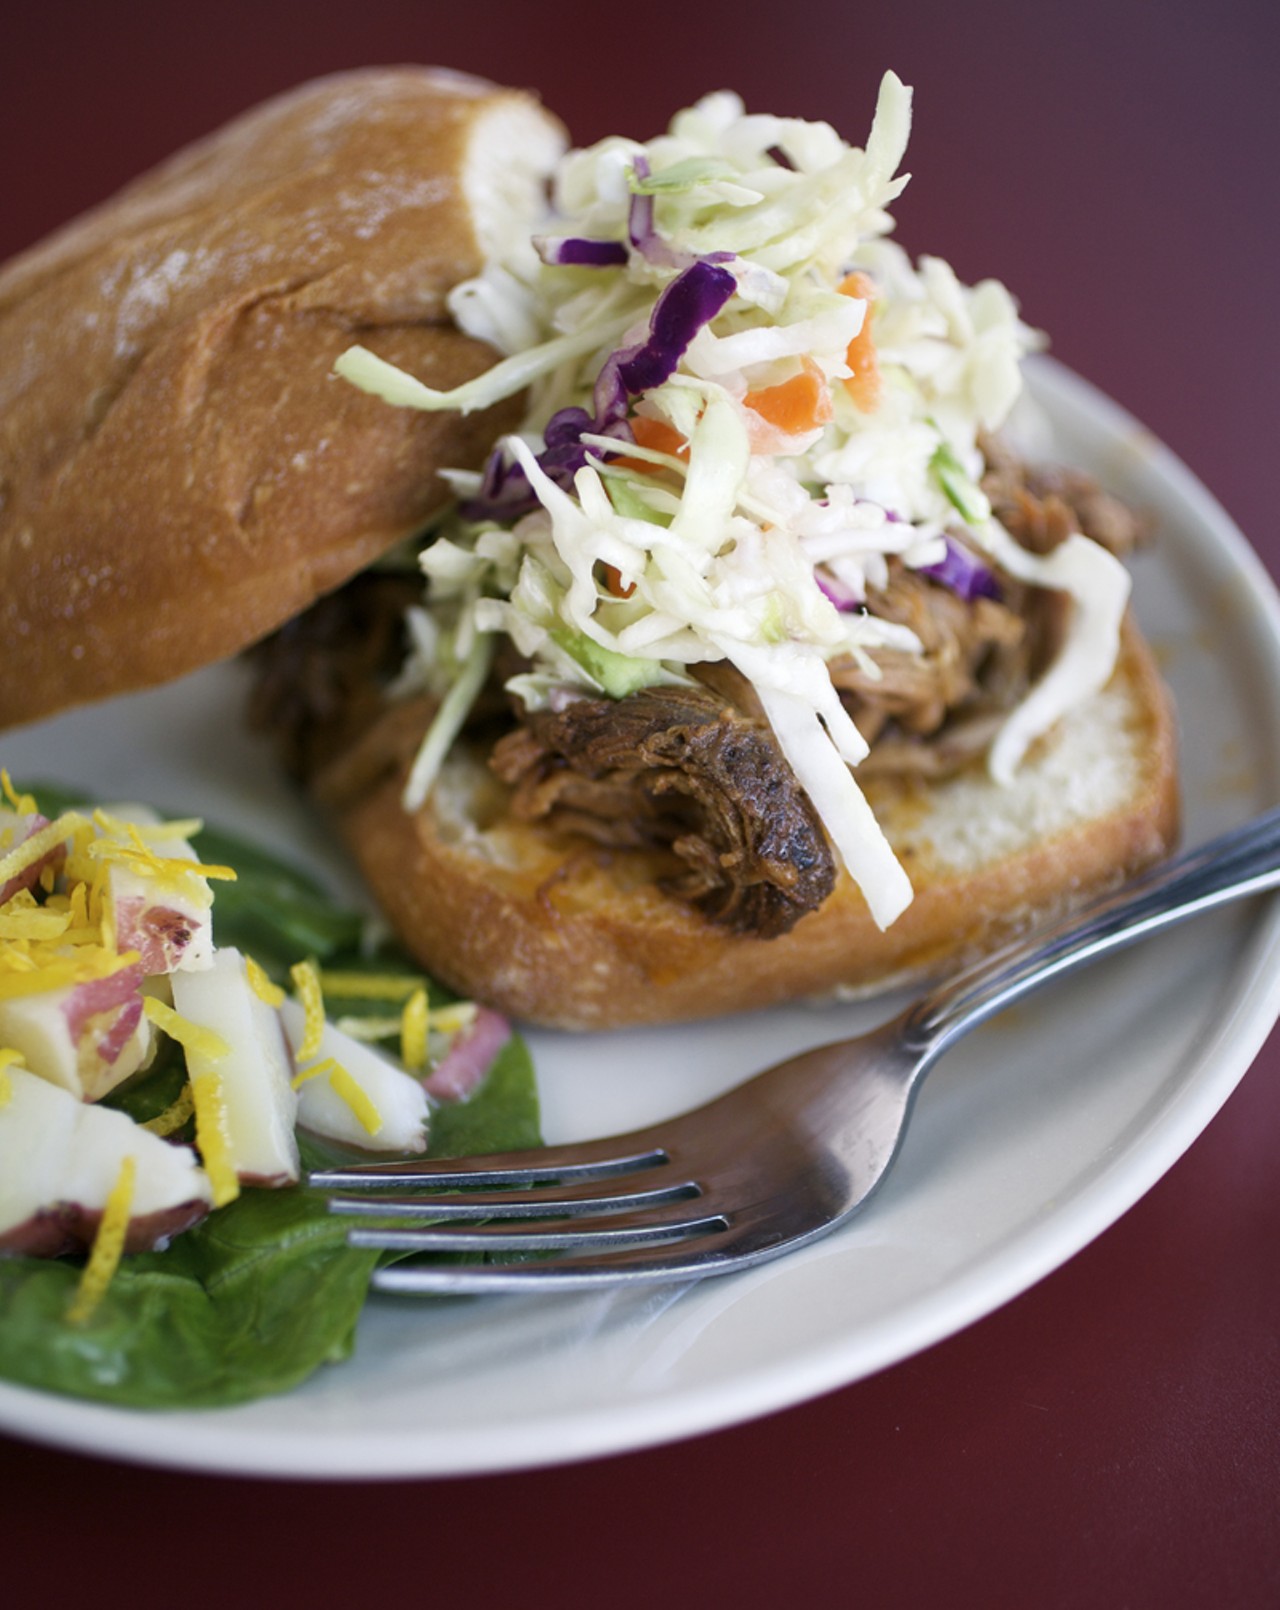 The beer brisket sandwich is served with coleslaw and citrus potato salad.